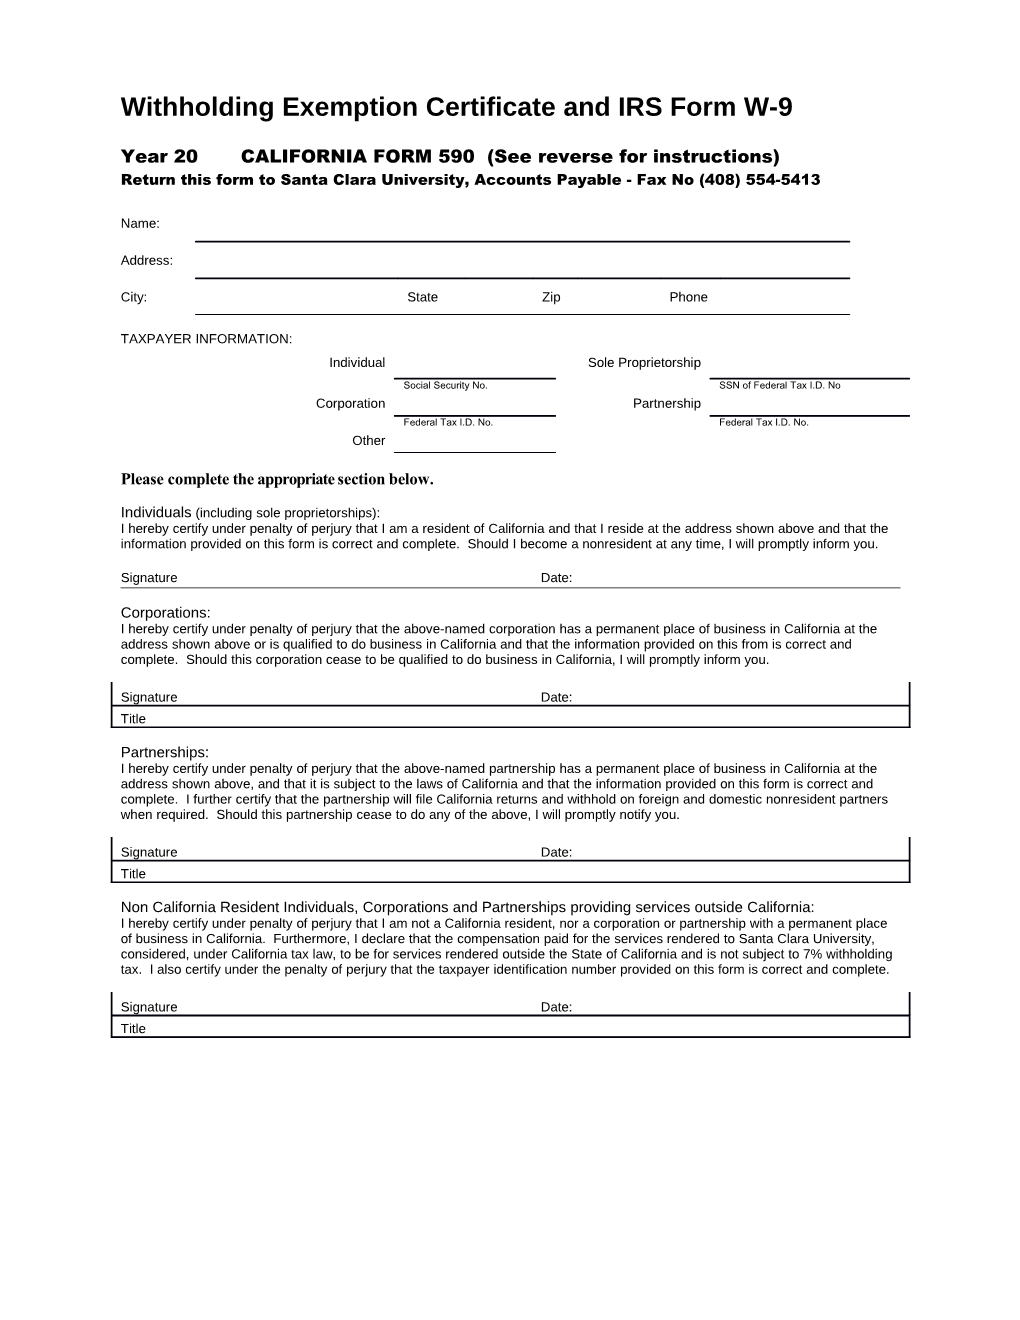 YEAR Withholding Exemption Certificate and IRS Form W-9	CALIFORNIA FORM